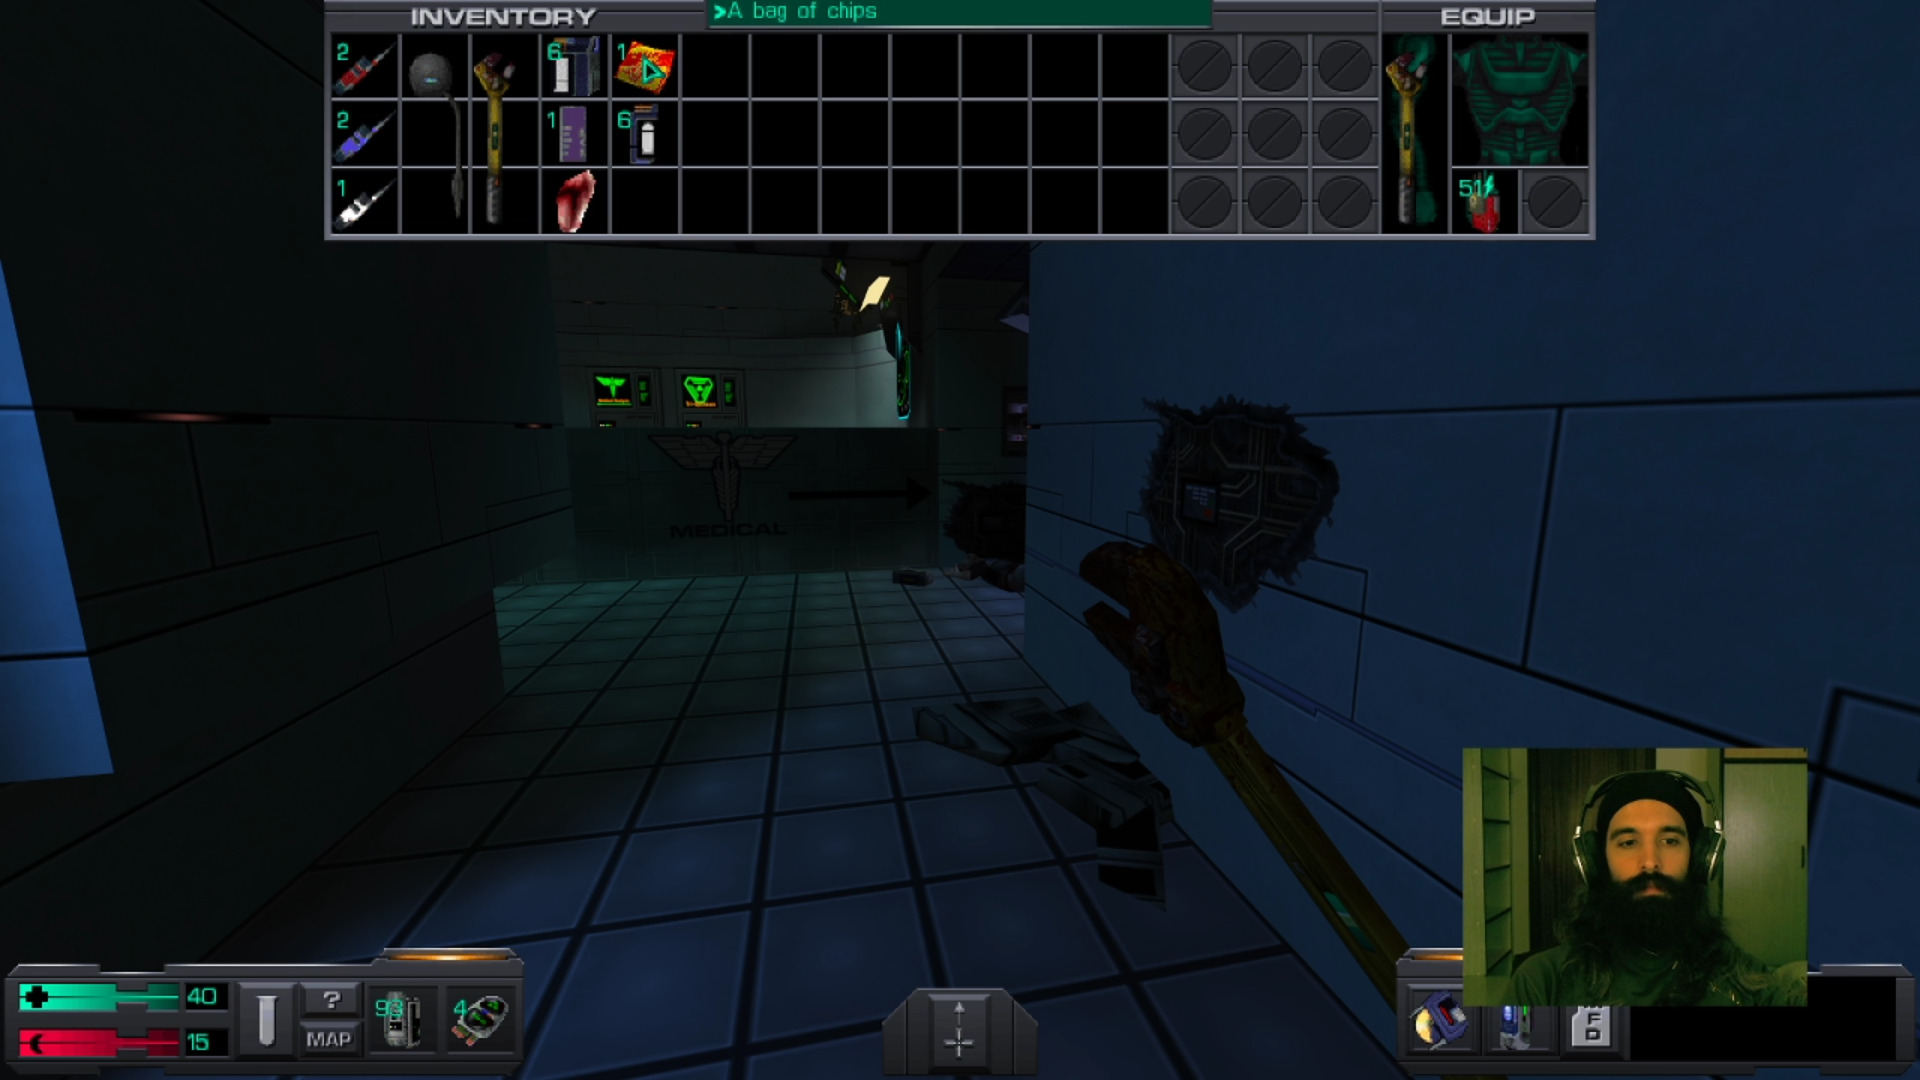 system shock 2 mod why